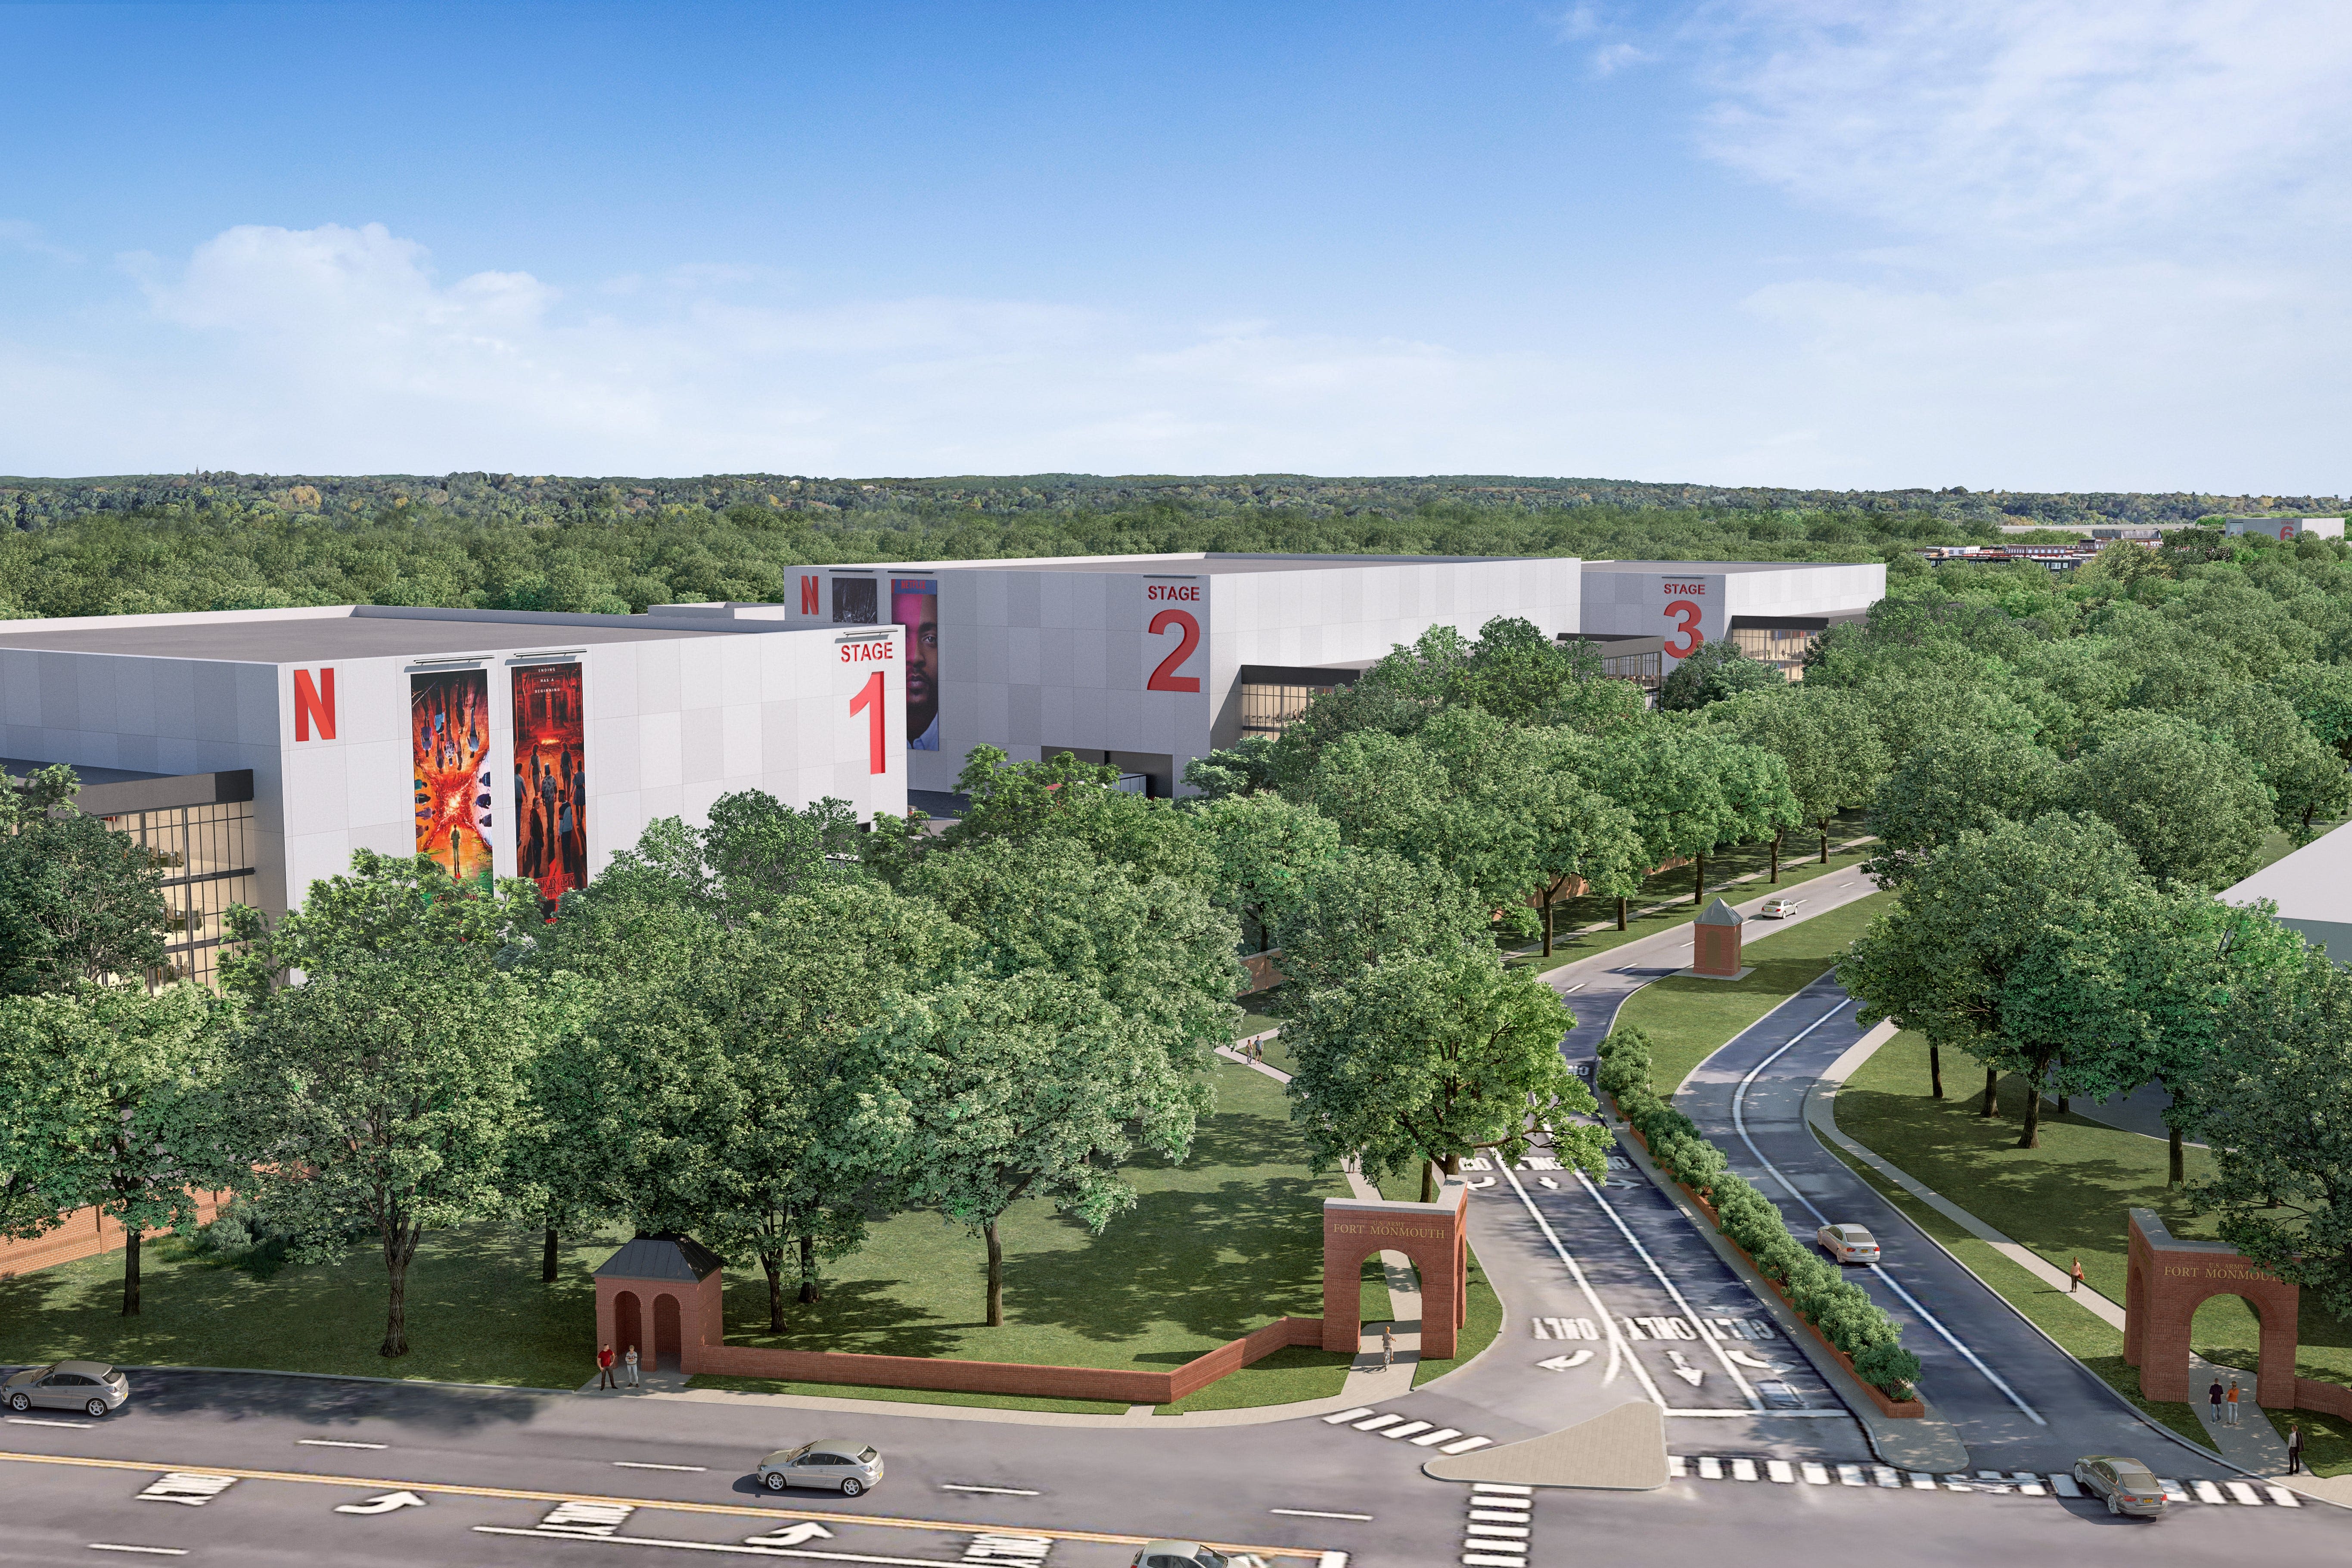 Netflix at Fort Monmouth may get $125M in NJ tax breaks; first studios could be up by 2027